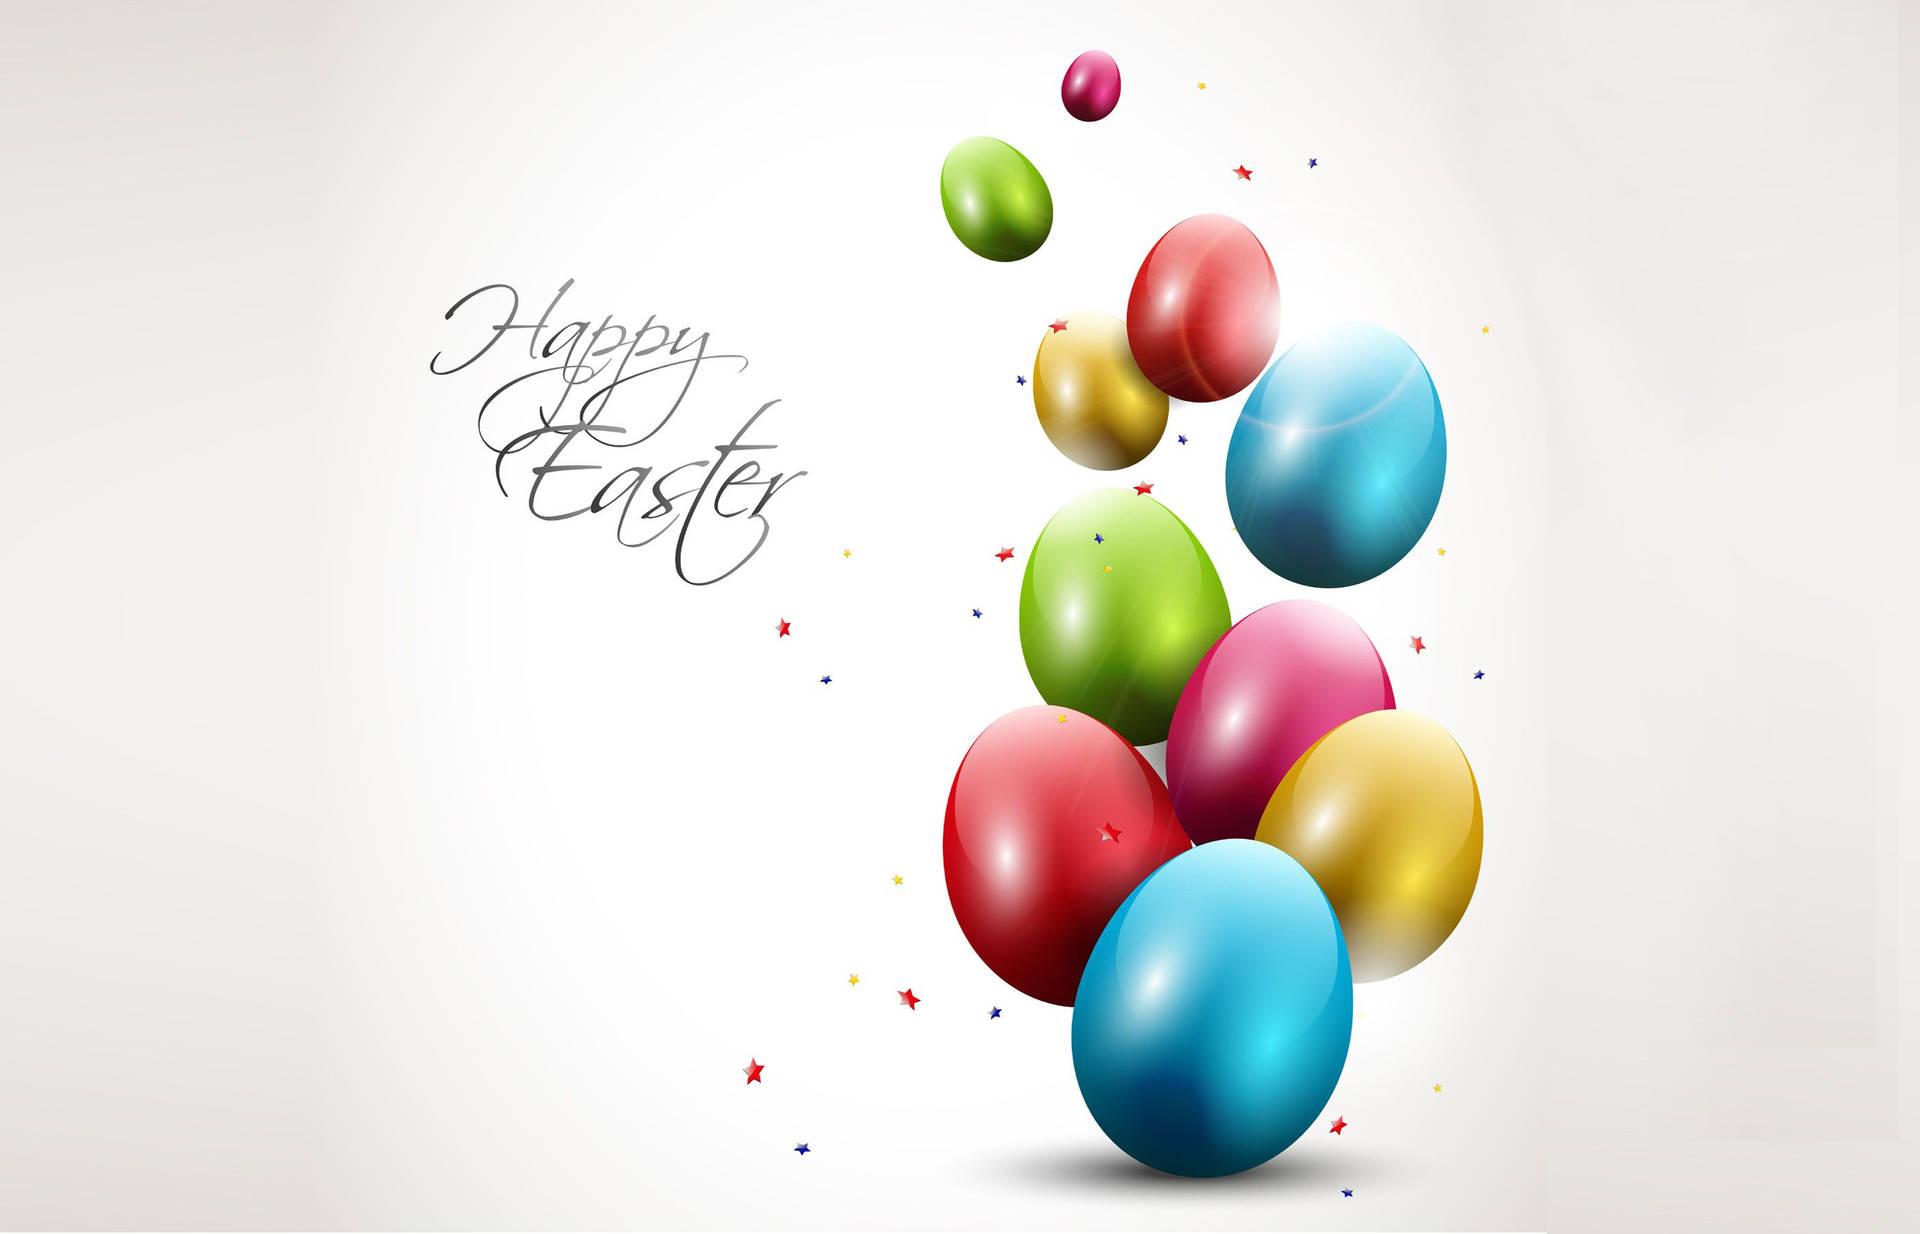 Silver Happy Easter With Eggs Digital Art Wallpaper